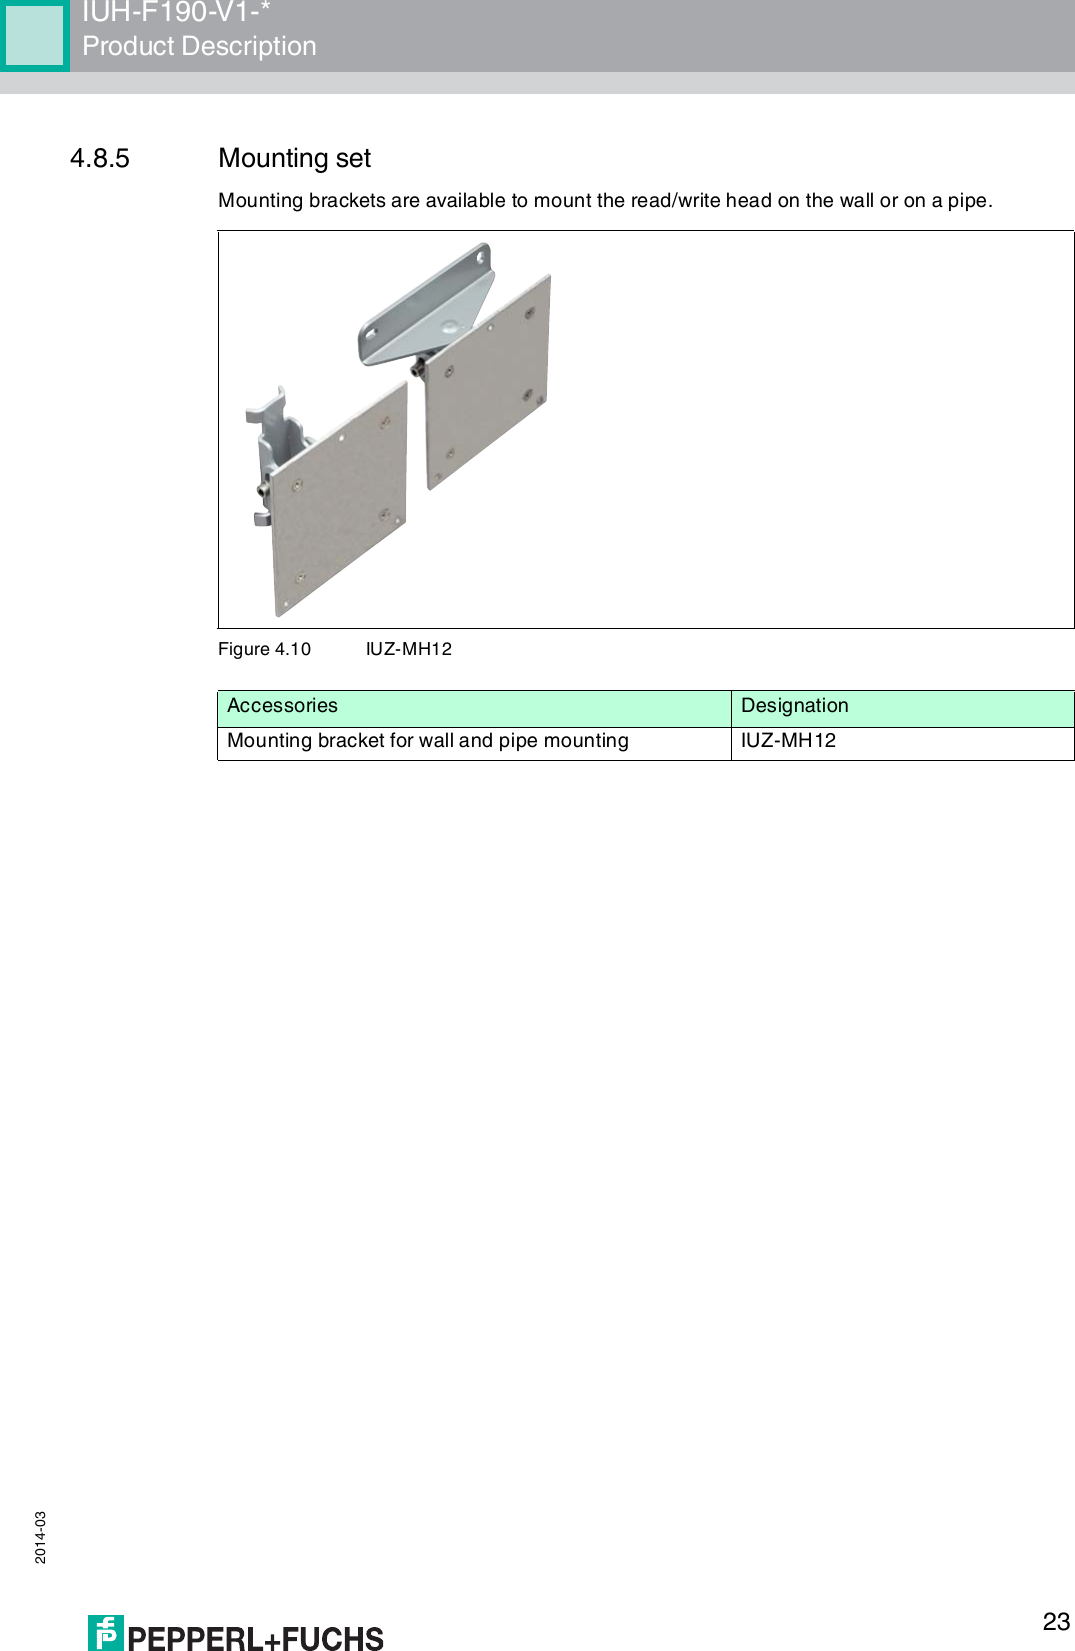 IUH-F190-V1-*Product Description 2014-03234.8.5 Mounting setMounting brackets are available to mount the read/write head on the wall or on a pipe.Figure 4.10 IUZ-MH12Accessories DesignationMounting bracket for wall and pipe mounting IUZ-MH12